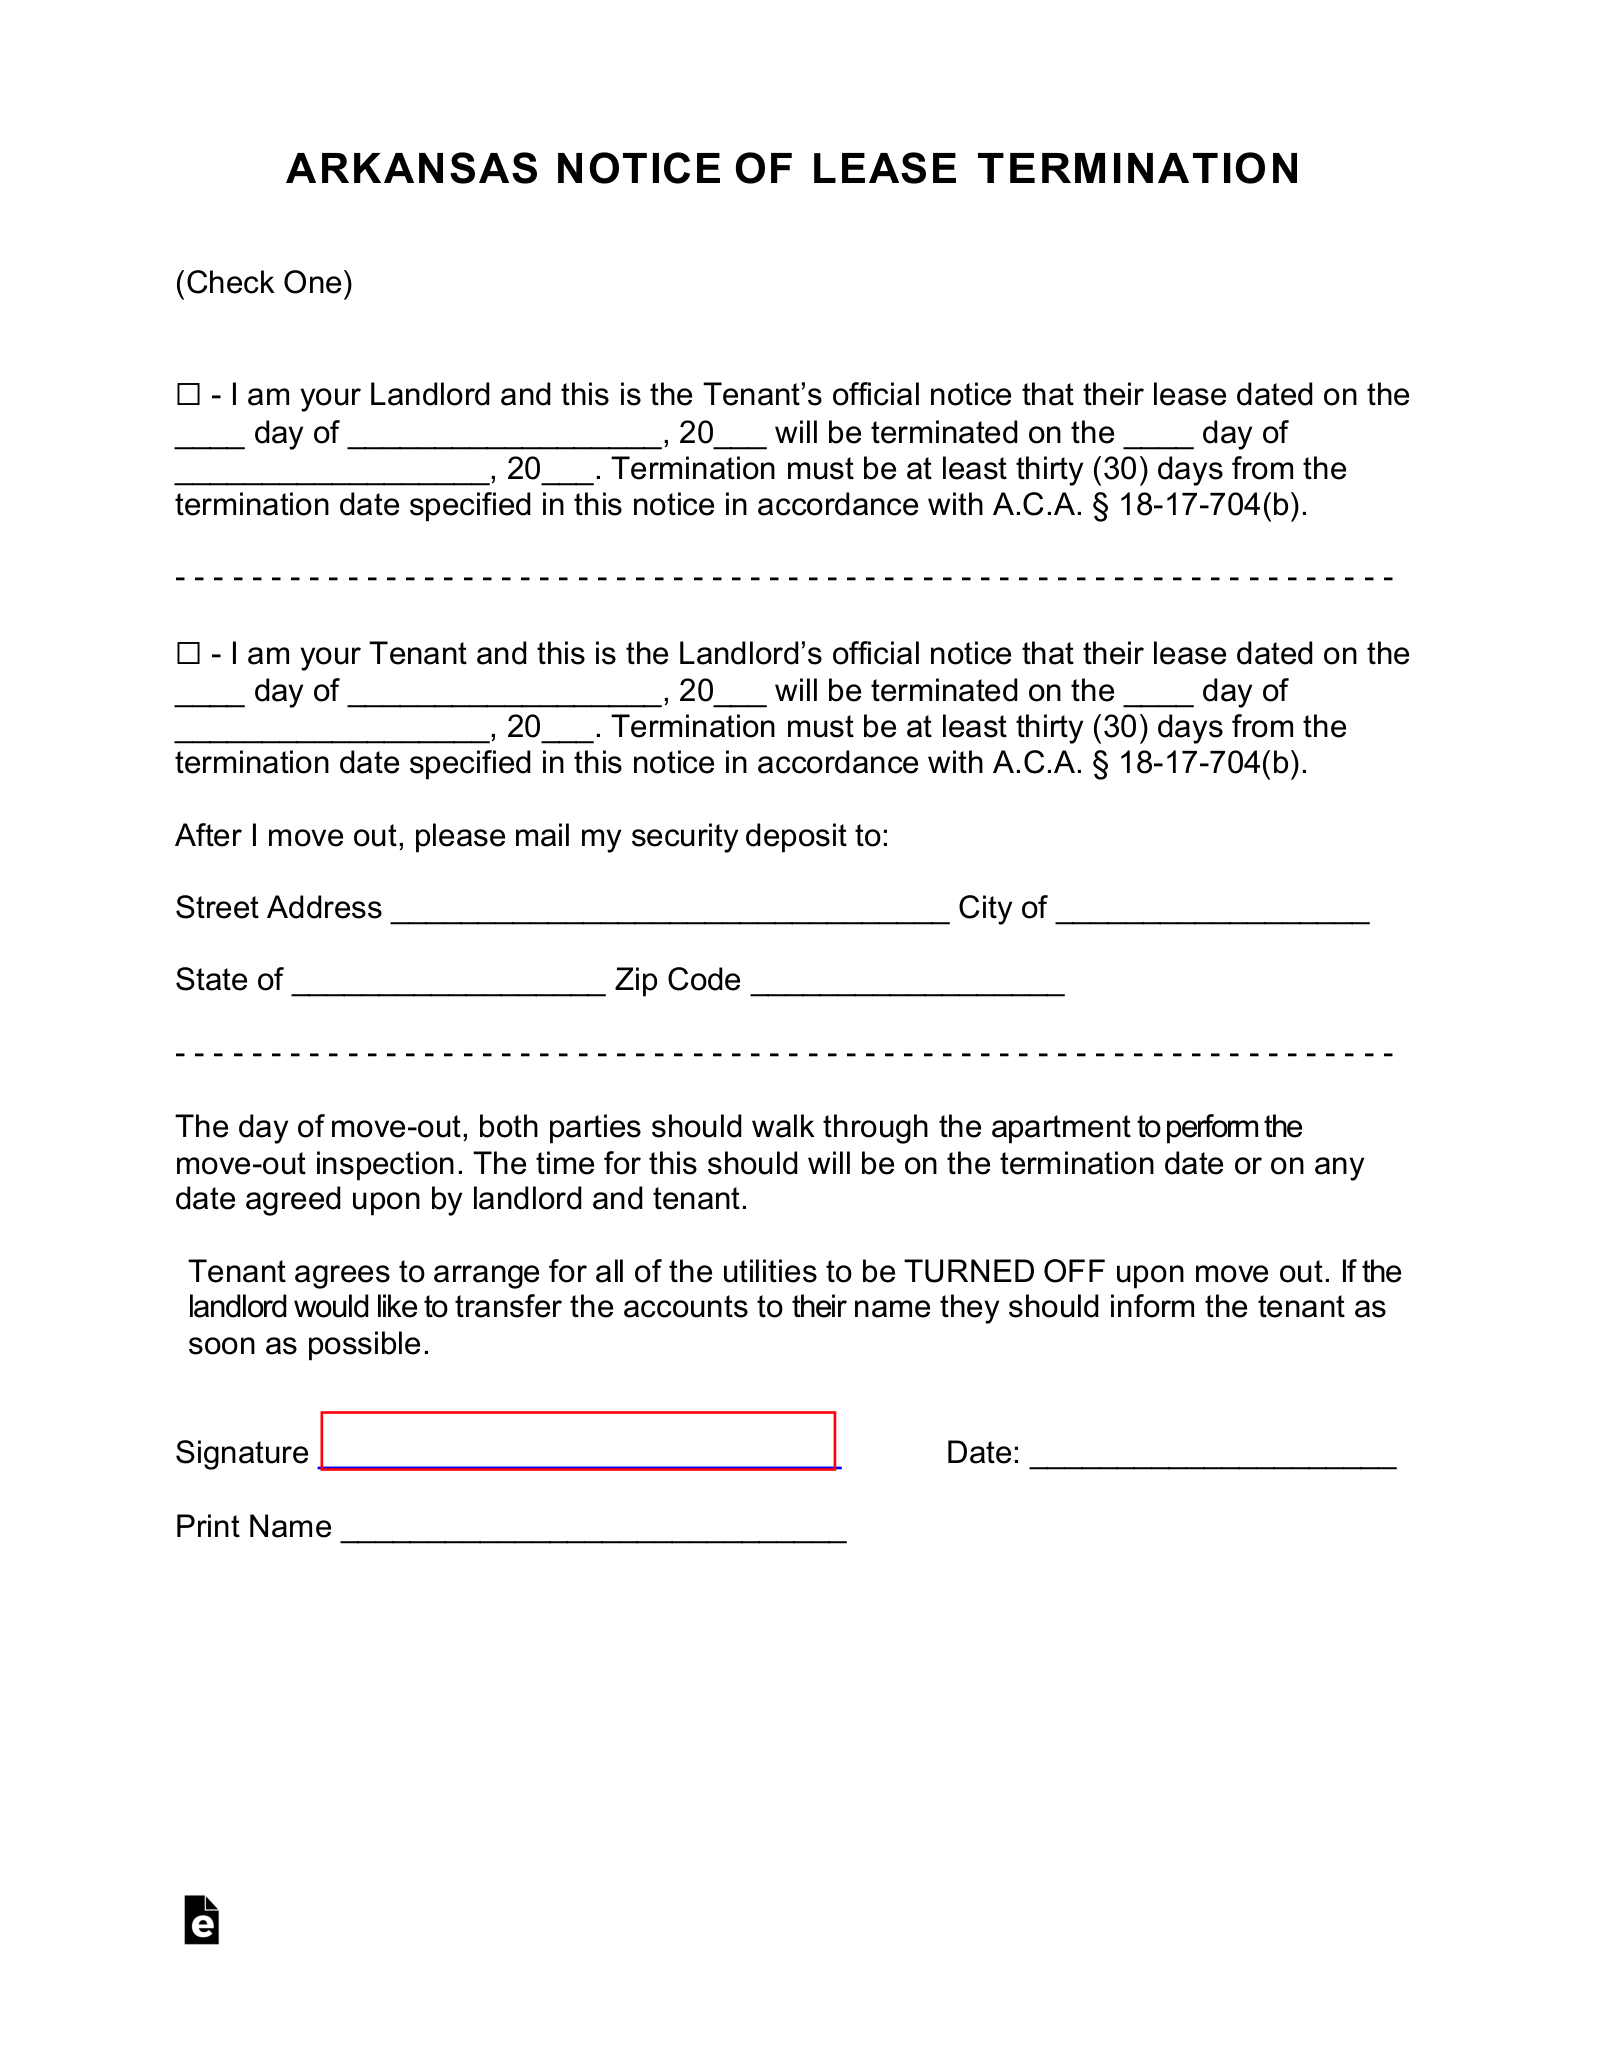 Lease Renewal Letter To Landlord Sample from eforms.com